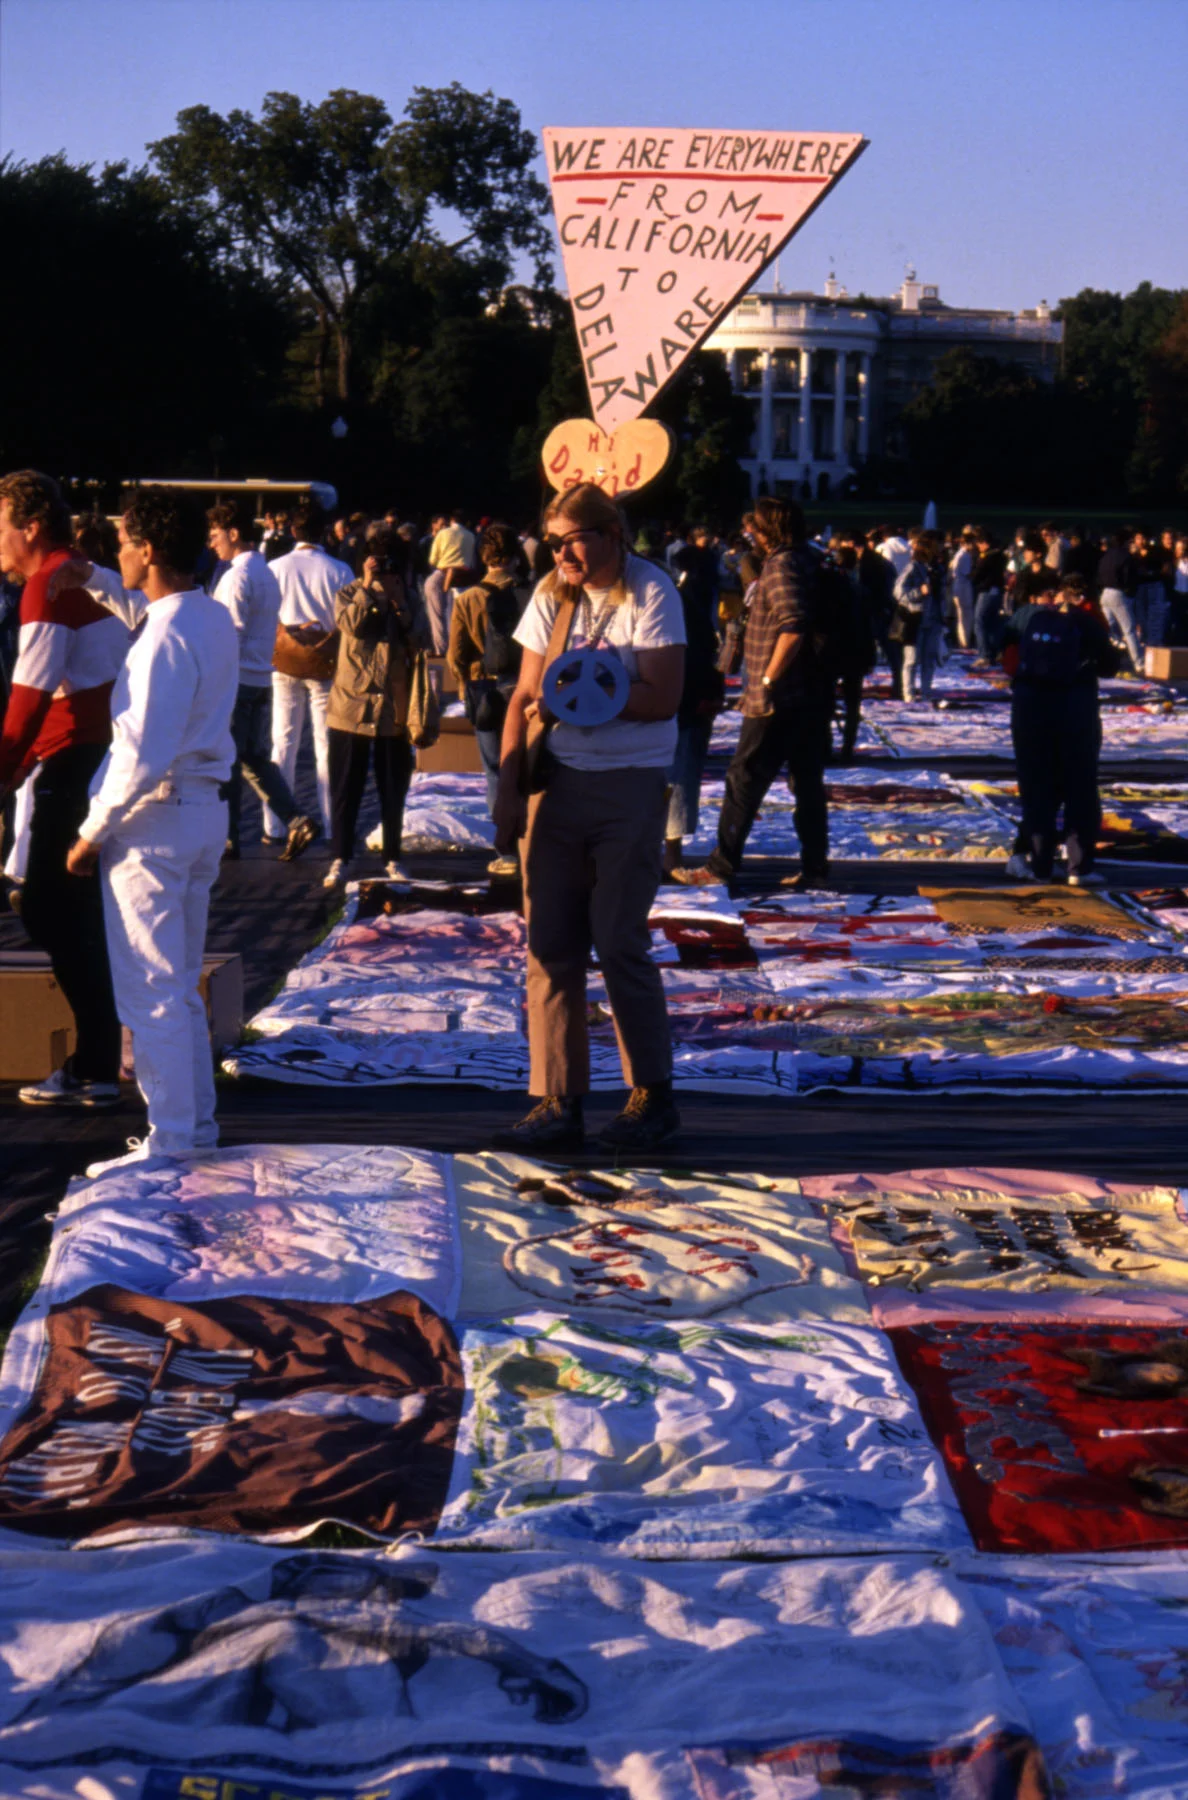 A color photograph showing dozens of colorful hand-painted quilts on the grass in Washington, D.C. Groups of people stand near the quilts, one of whom is holding a triangular sign that reads “WE ARE EVERYWHERE FROM CALIFORNIA TO DELAWARE.”
Behind them, a line of trees is visible.
